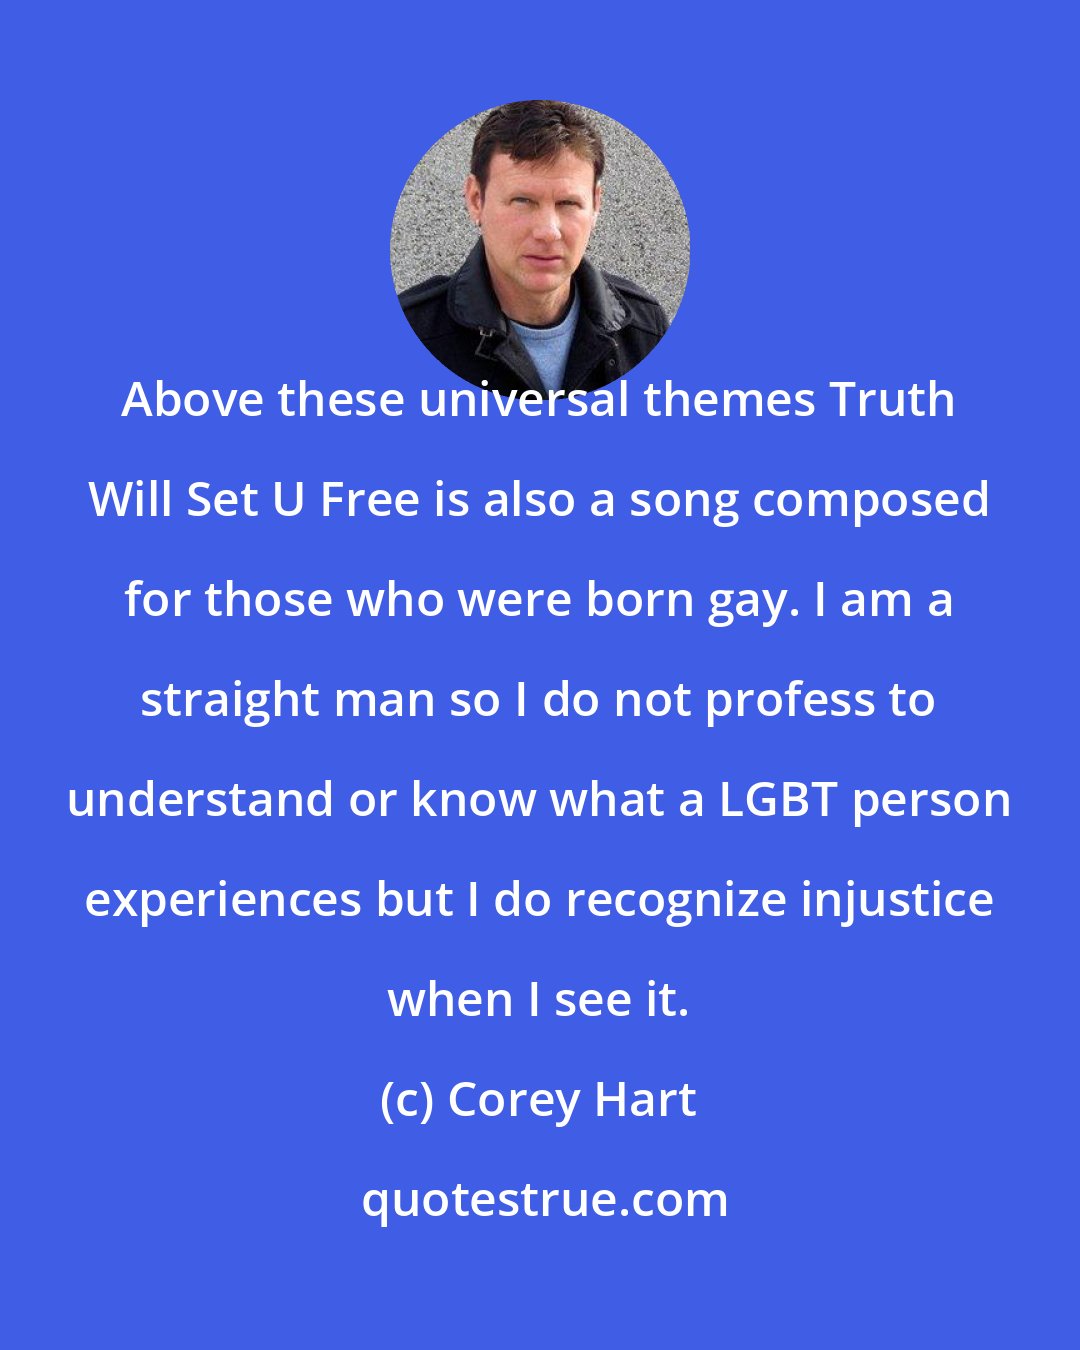 Corey Hart: Above these universal themes Truth Will Set U Free is also a song composed for those who were born gay. I am a straight man so I do not profess to understand or know what a LGBT person experiences but I do recognize injustice when I see it.